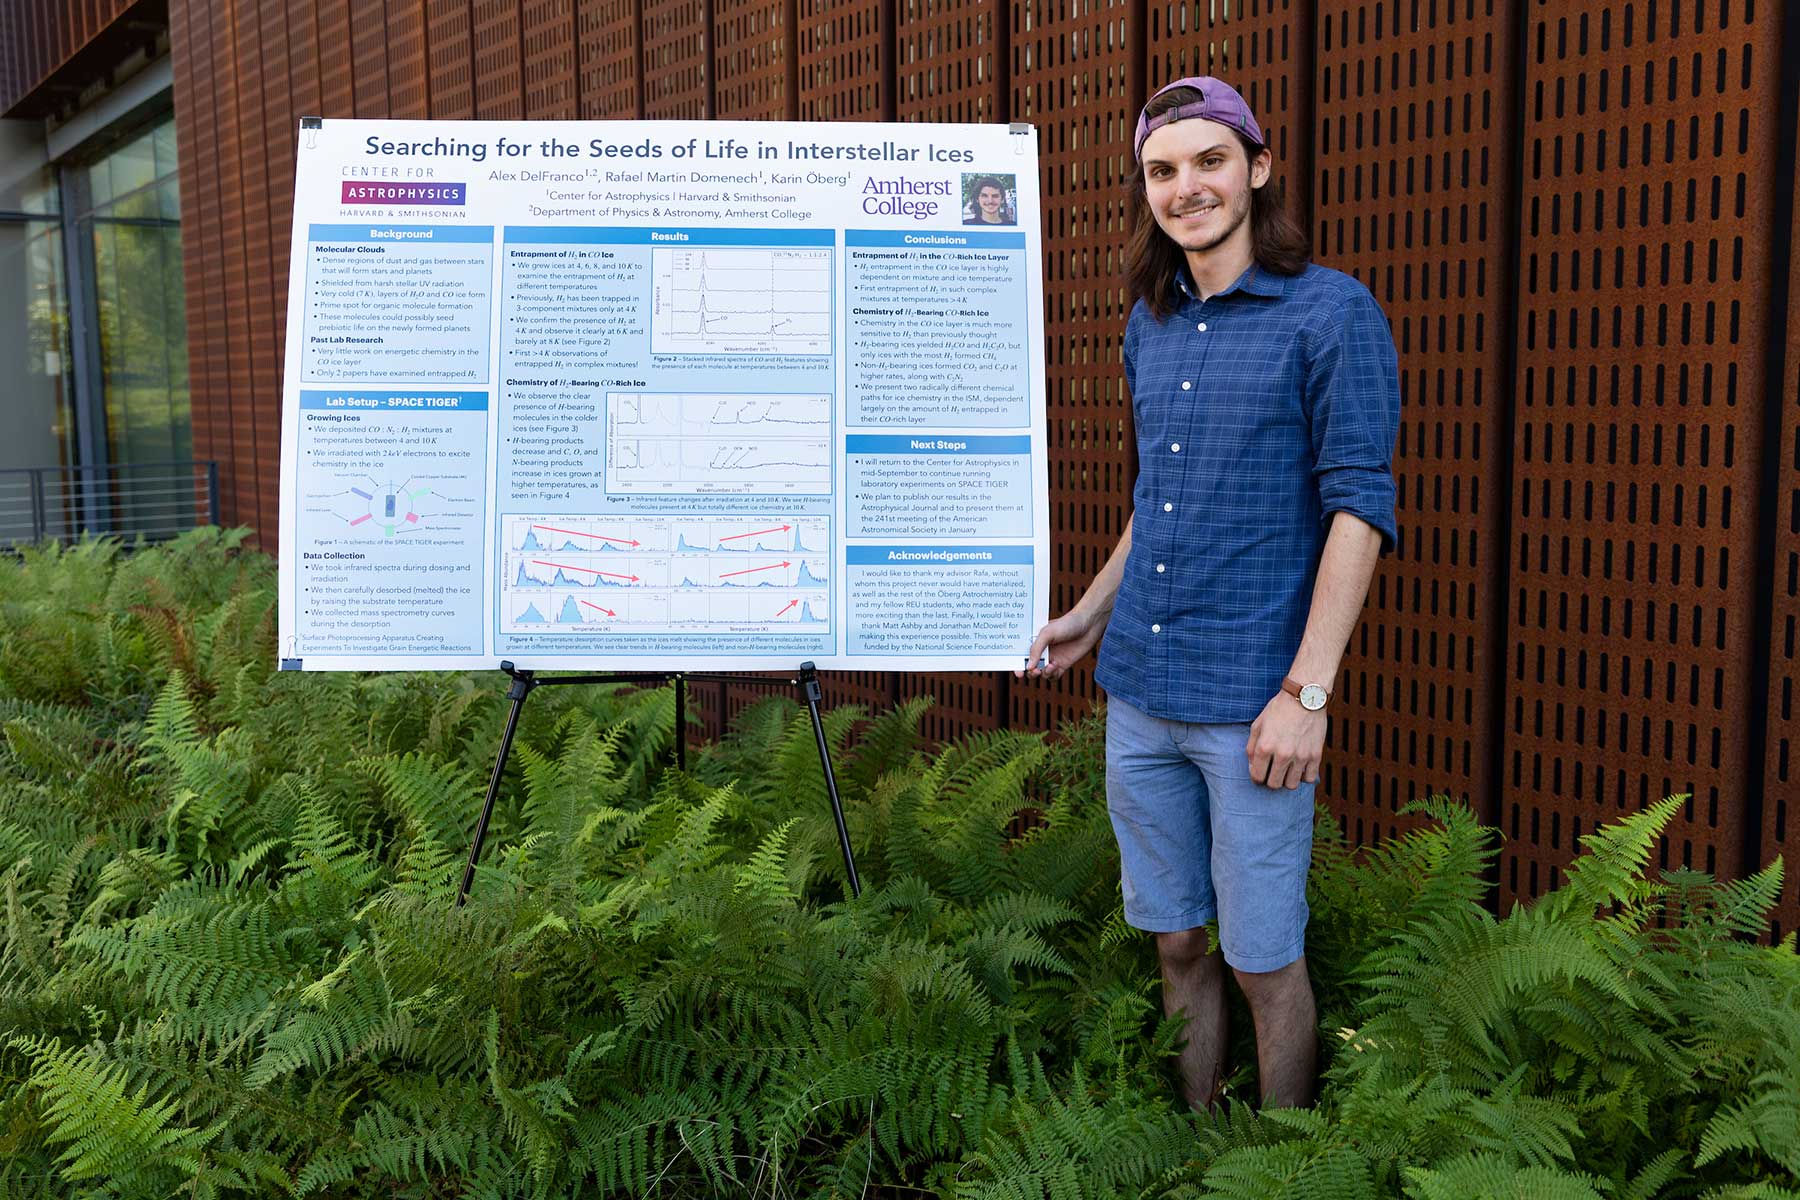 Alex DelFranco '24 holds a poster of his summer research on Searching for the Seeds of Life in Interstellar Ices.